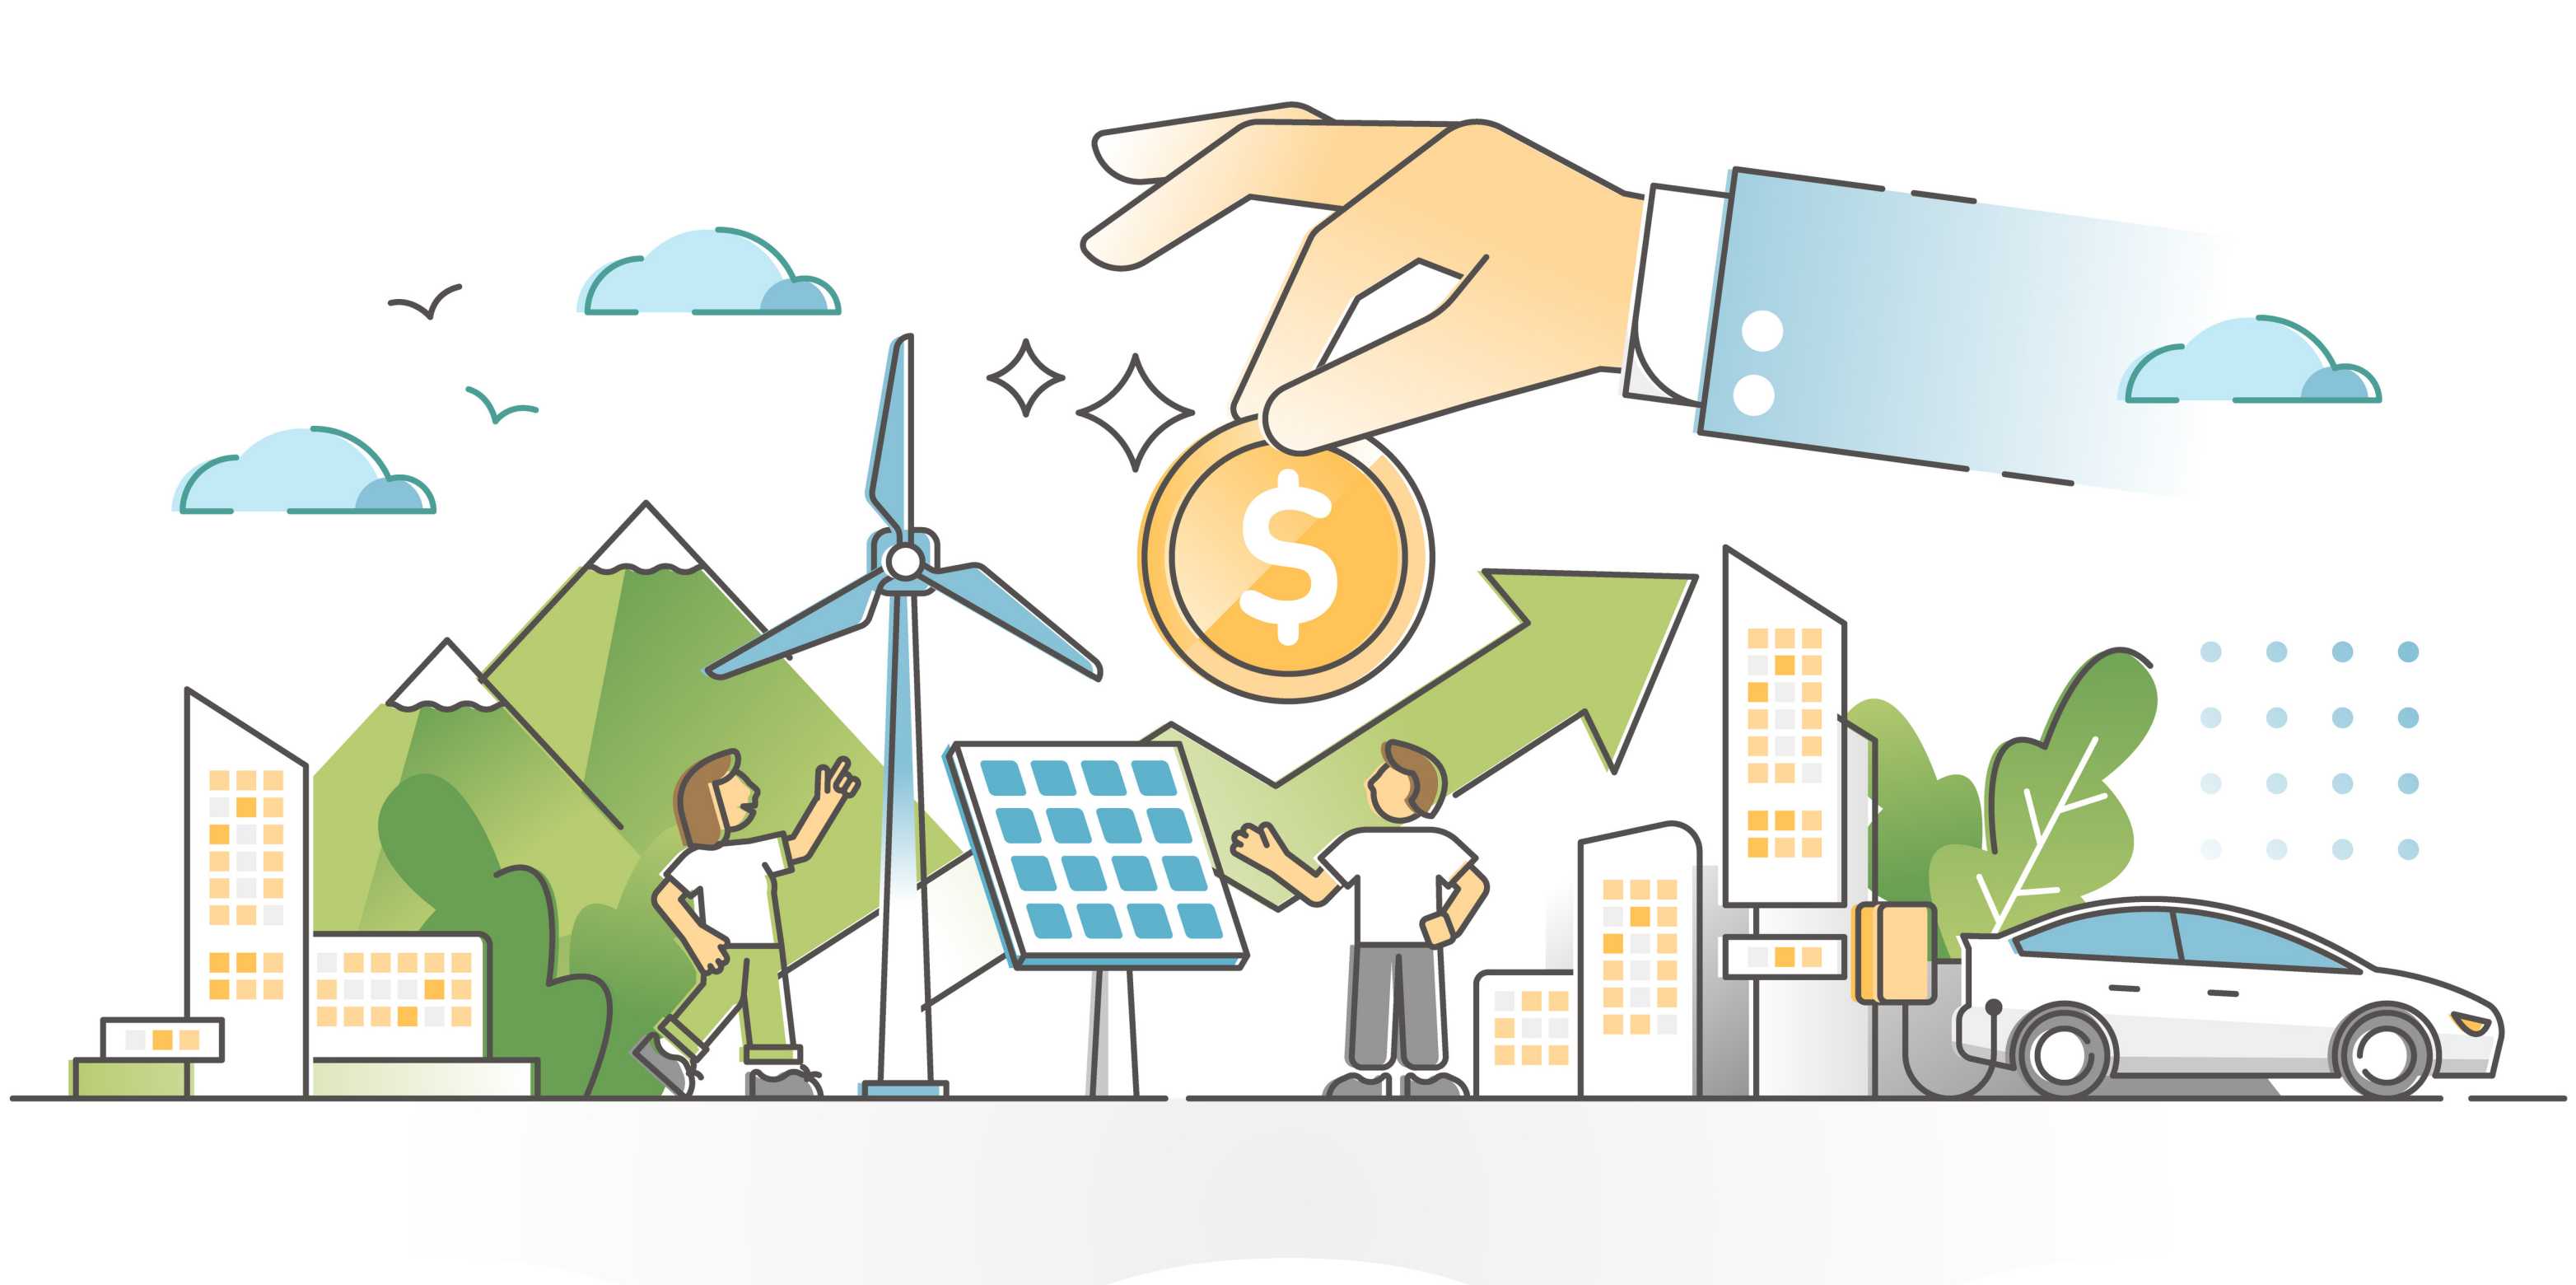 Illustration renewable energies and required financing